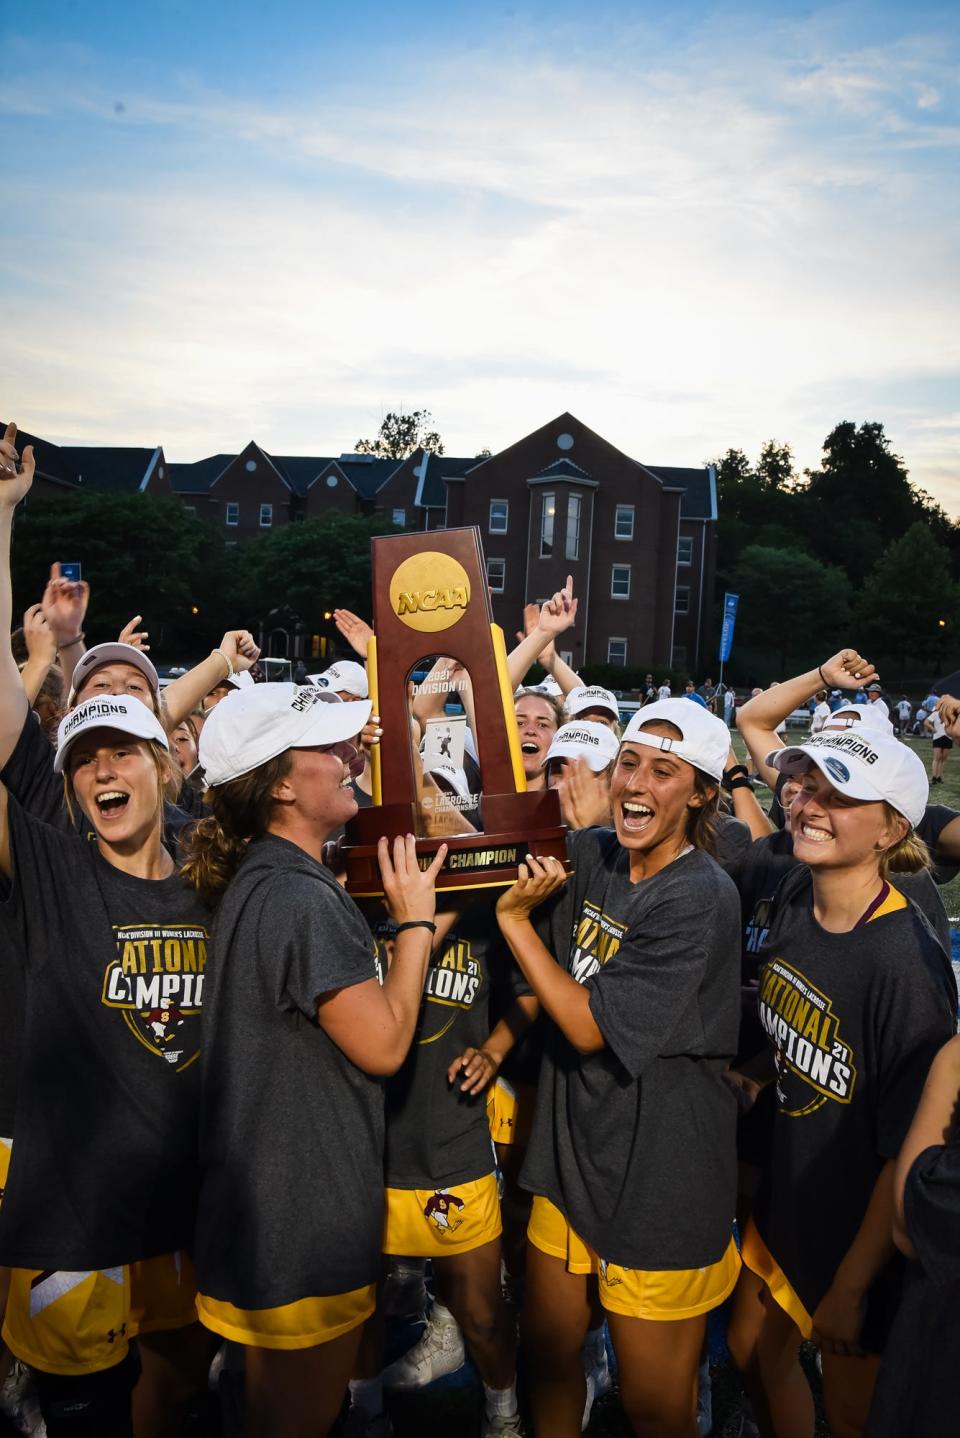 The Salisbury University women's lacrosse team defeated Tufts on Sunday, May 24, 2021 to claim the program's fourth Division III national championship.